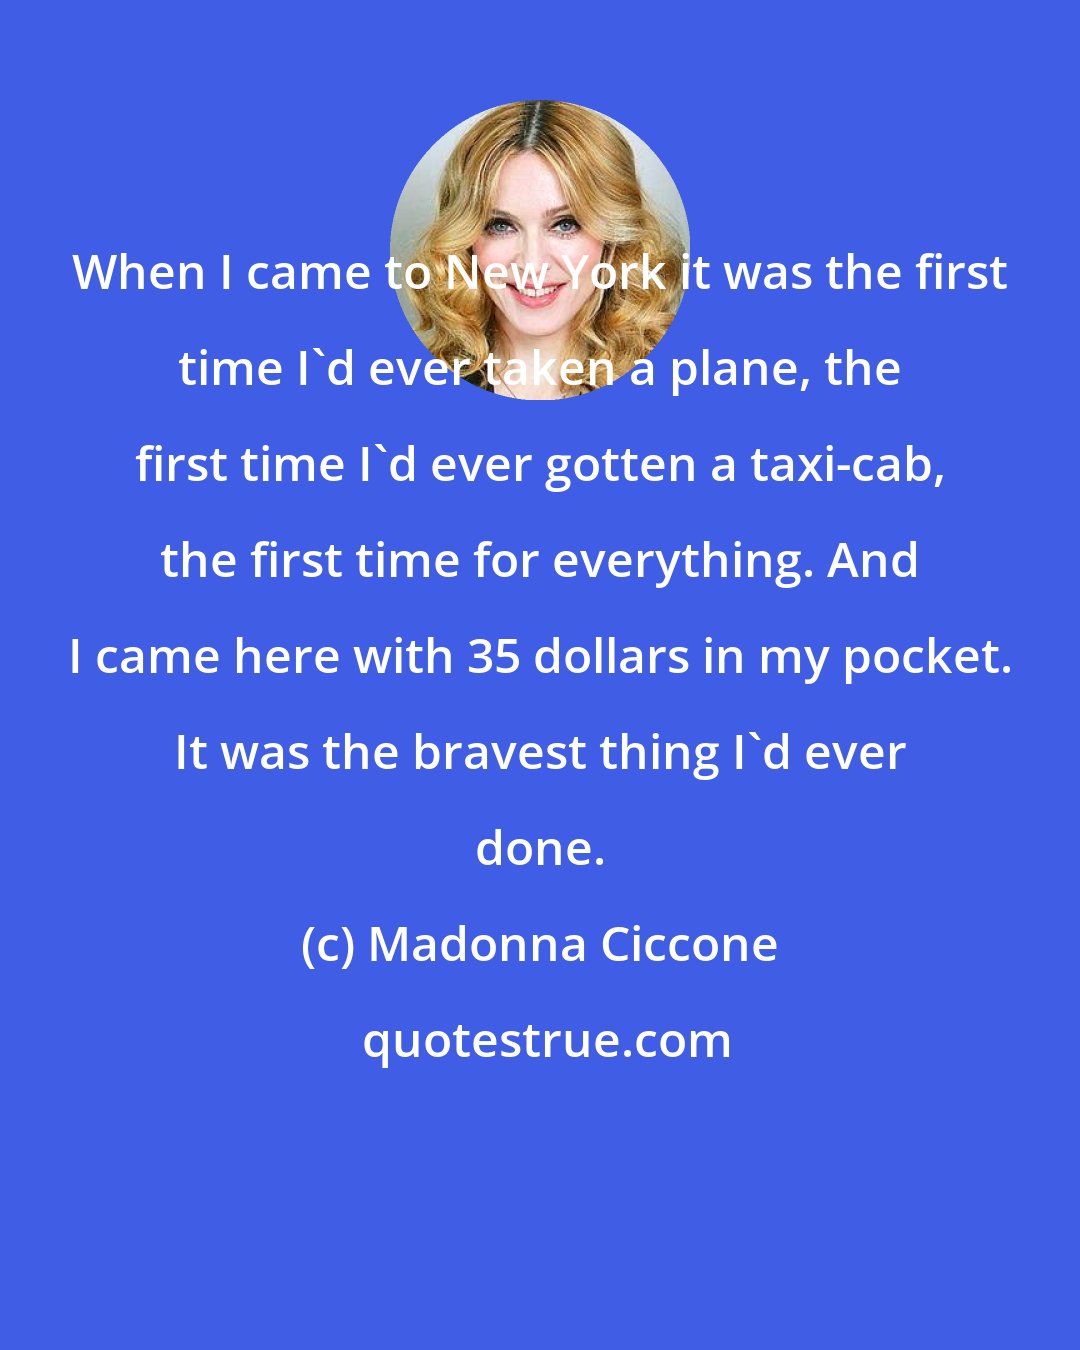 Madonna Ciccone: When I came to New York it was the first time I'd ever taken a plane, the first time I'd ever gotten a taxi-cab, the first time for everything. And I came here with 35 dollars in my pocket. It was the bravest thing I'd ever done.